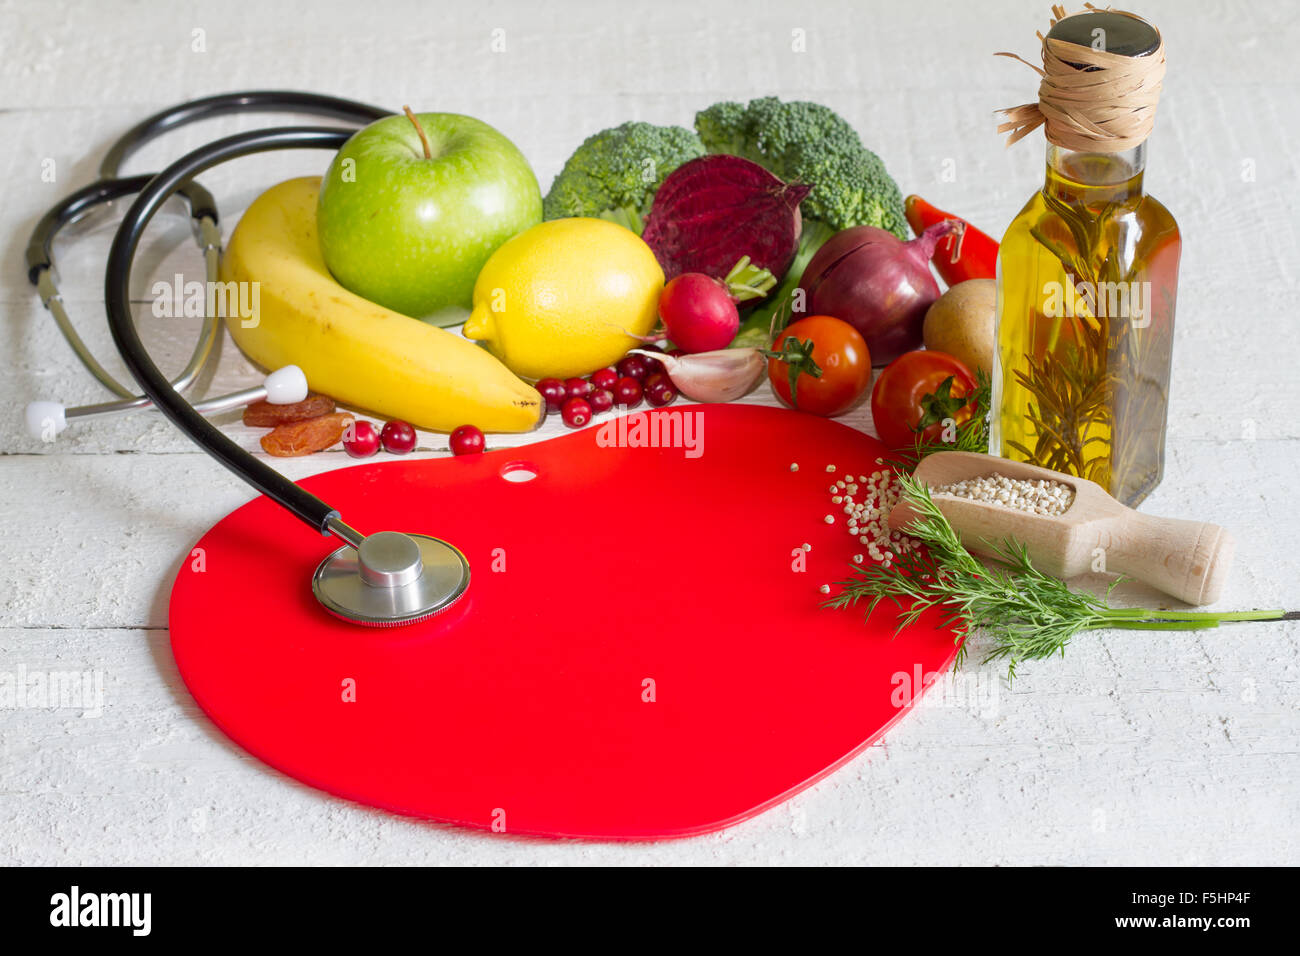 Healthy food in heart sign of healthy lifestyle concept Stock Photo